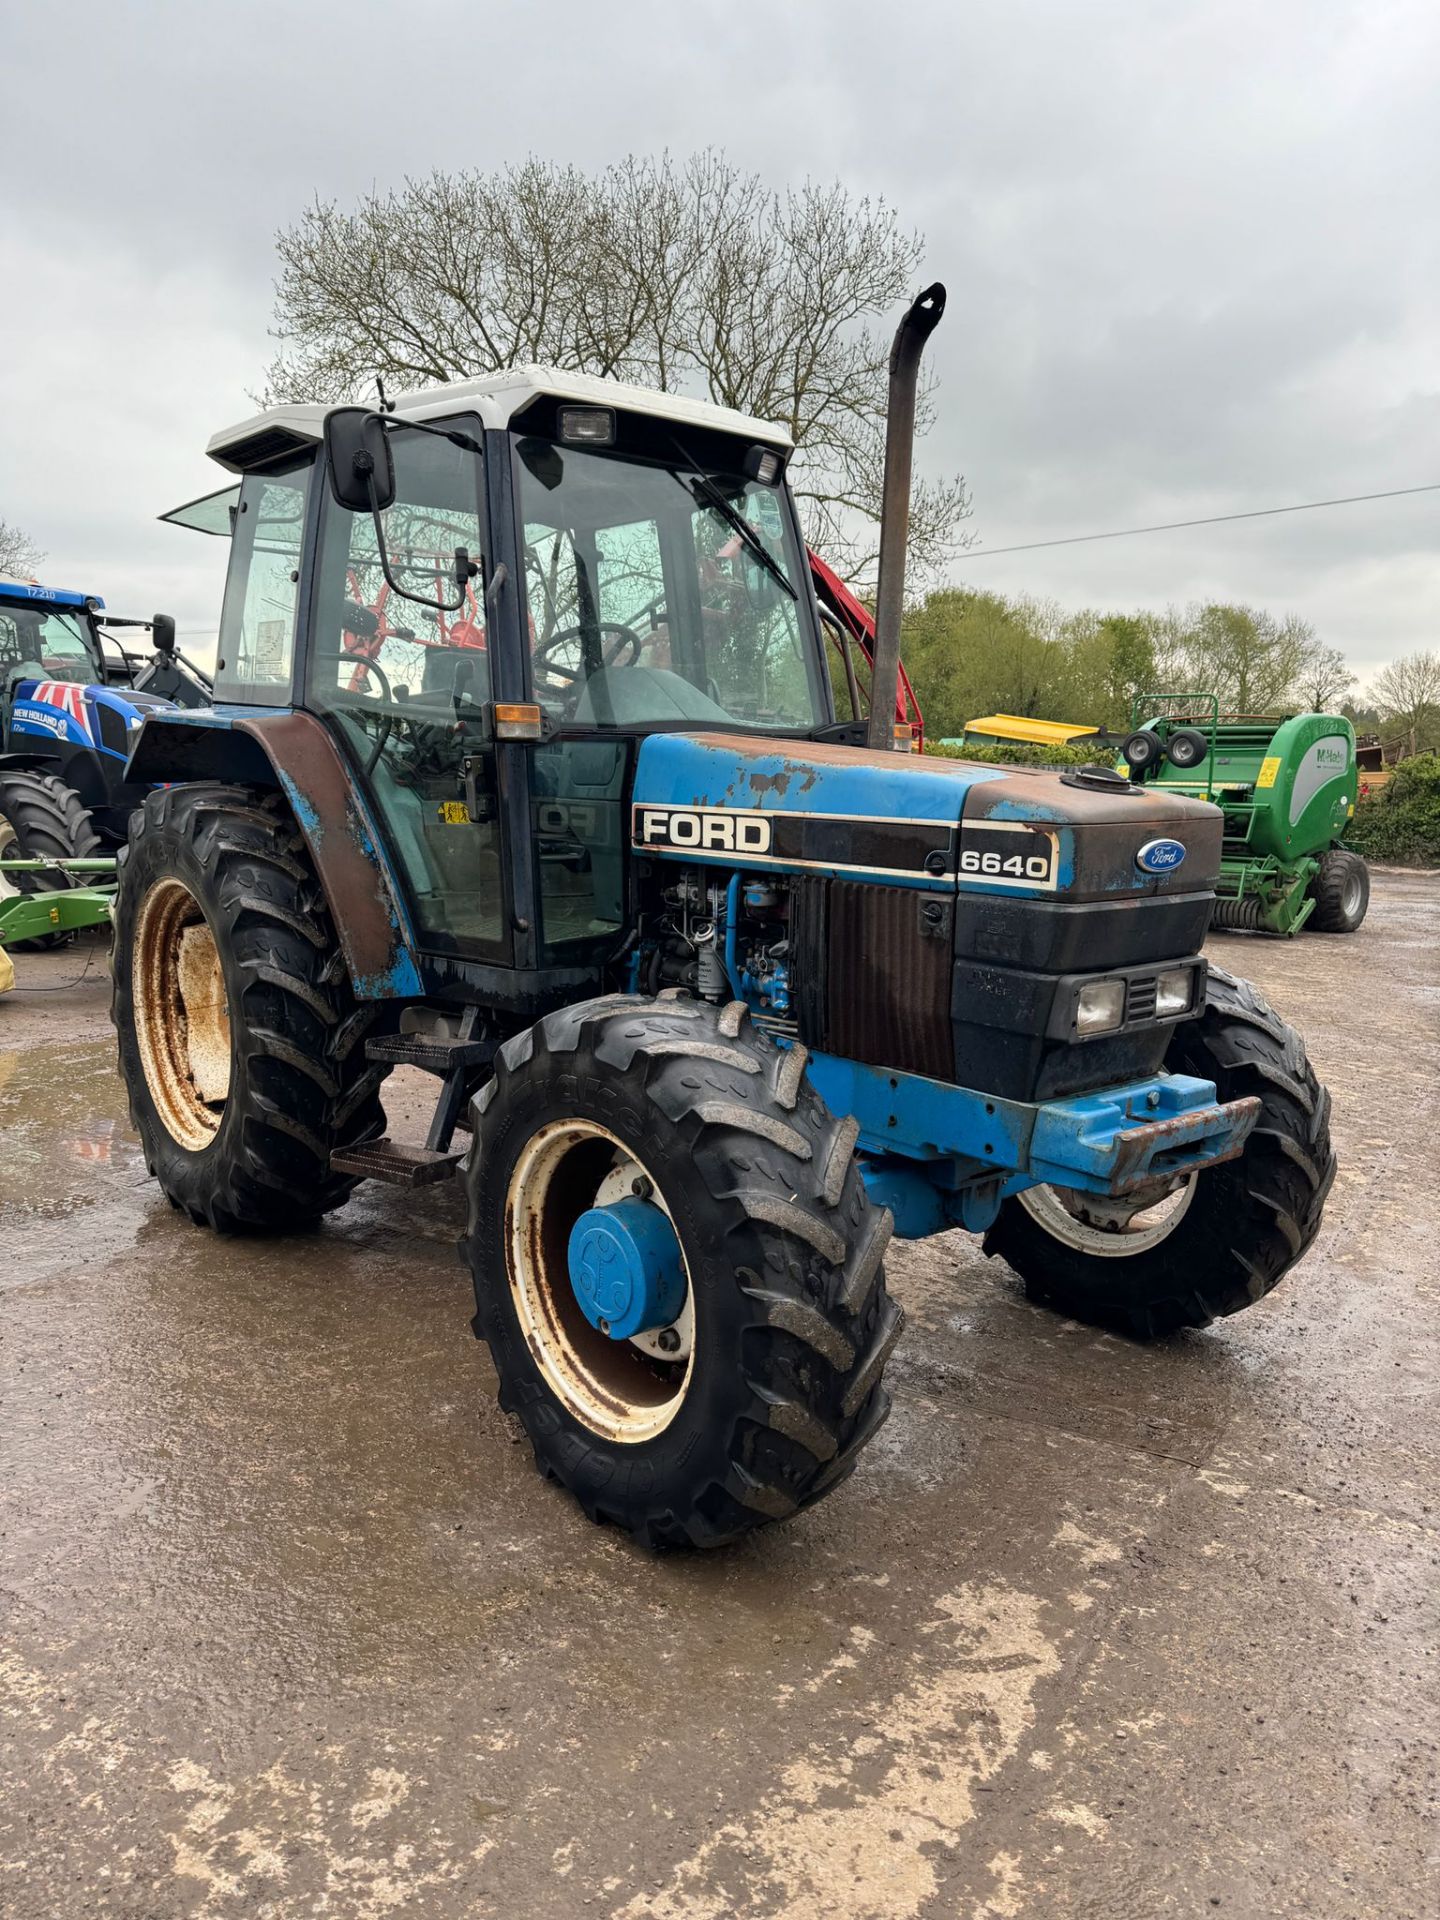 RELIABLE FORD 6640 SL TRACTOR READY FOR ACTION!